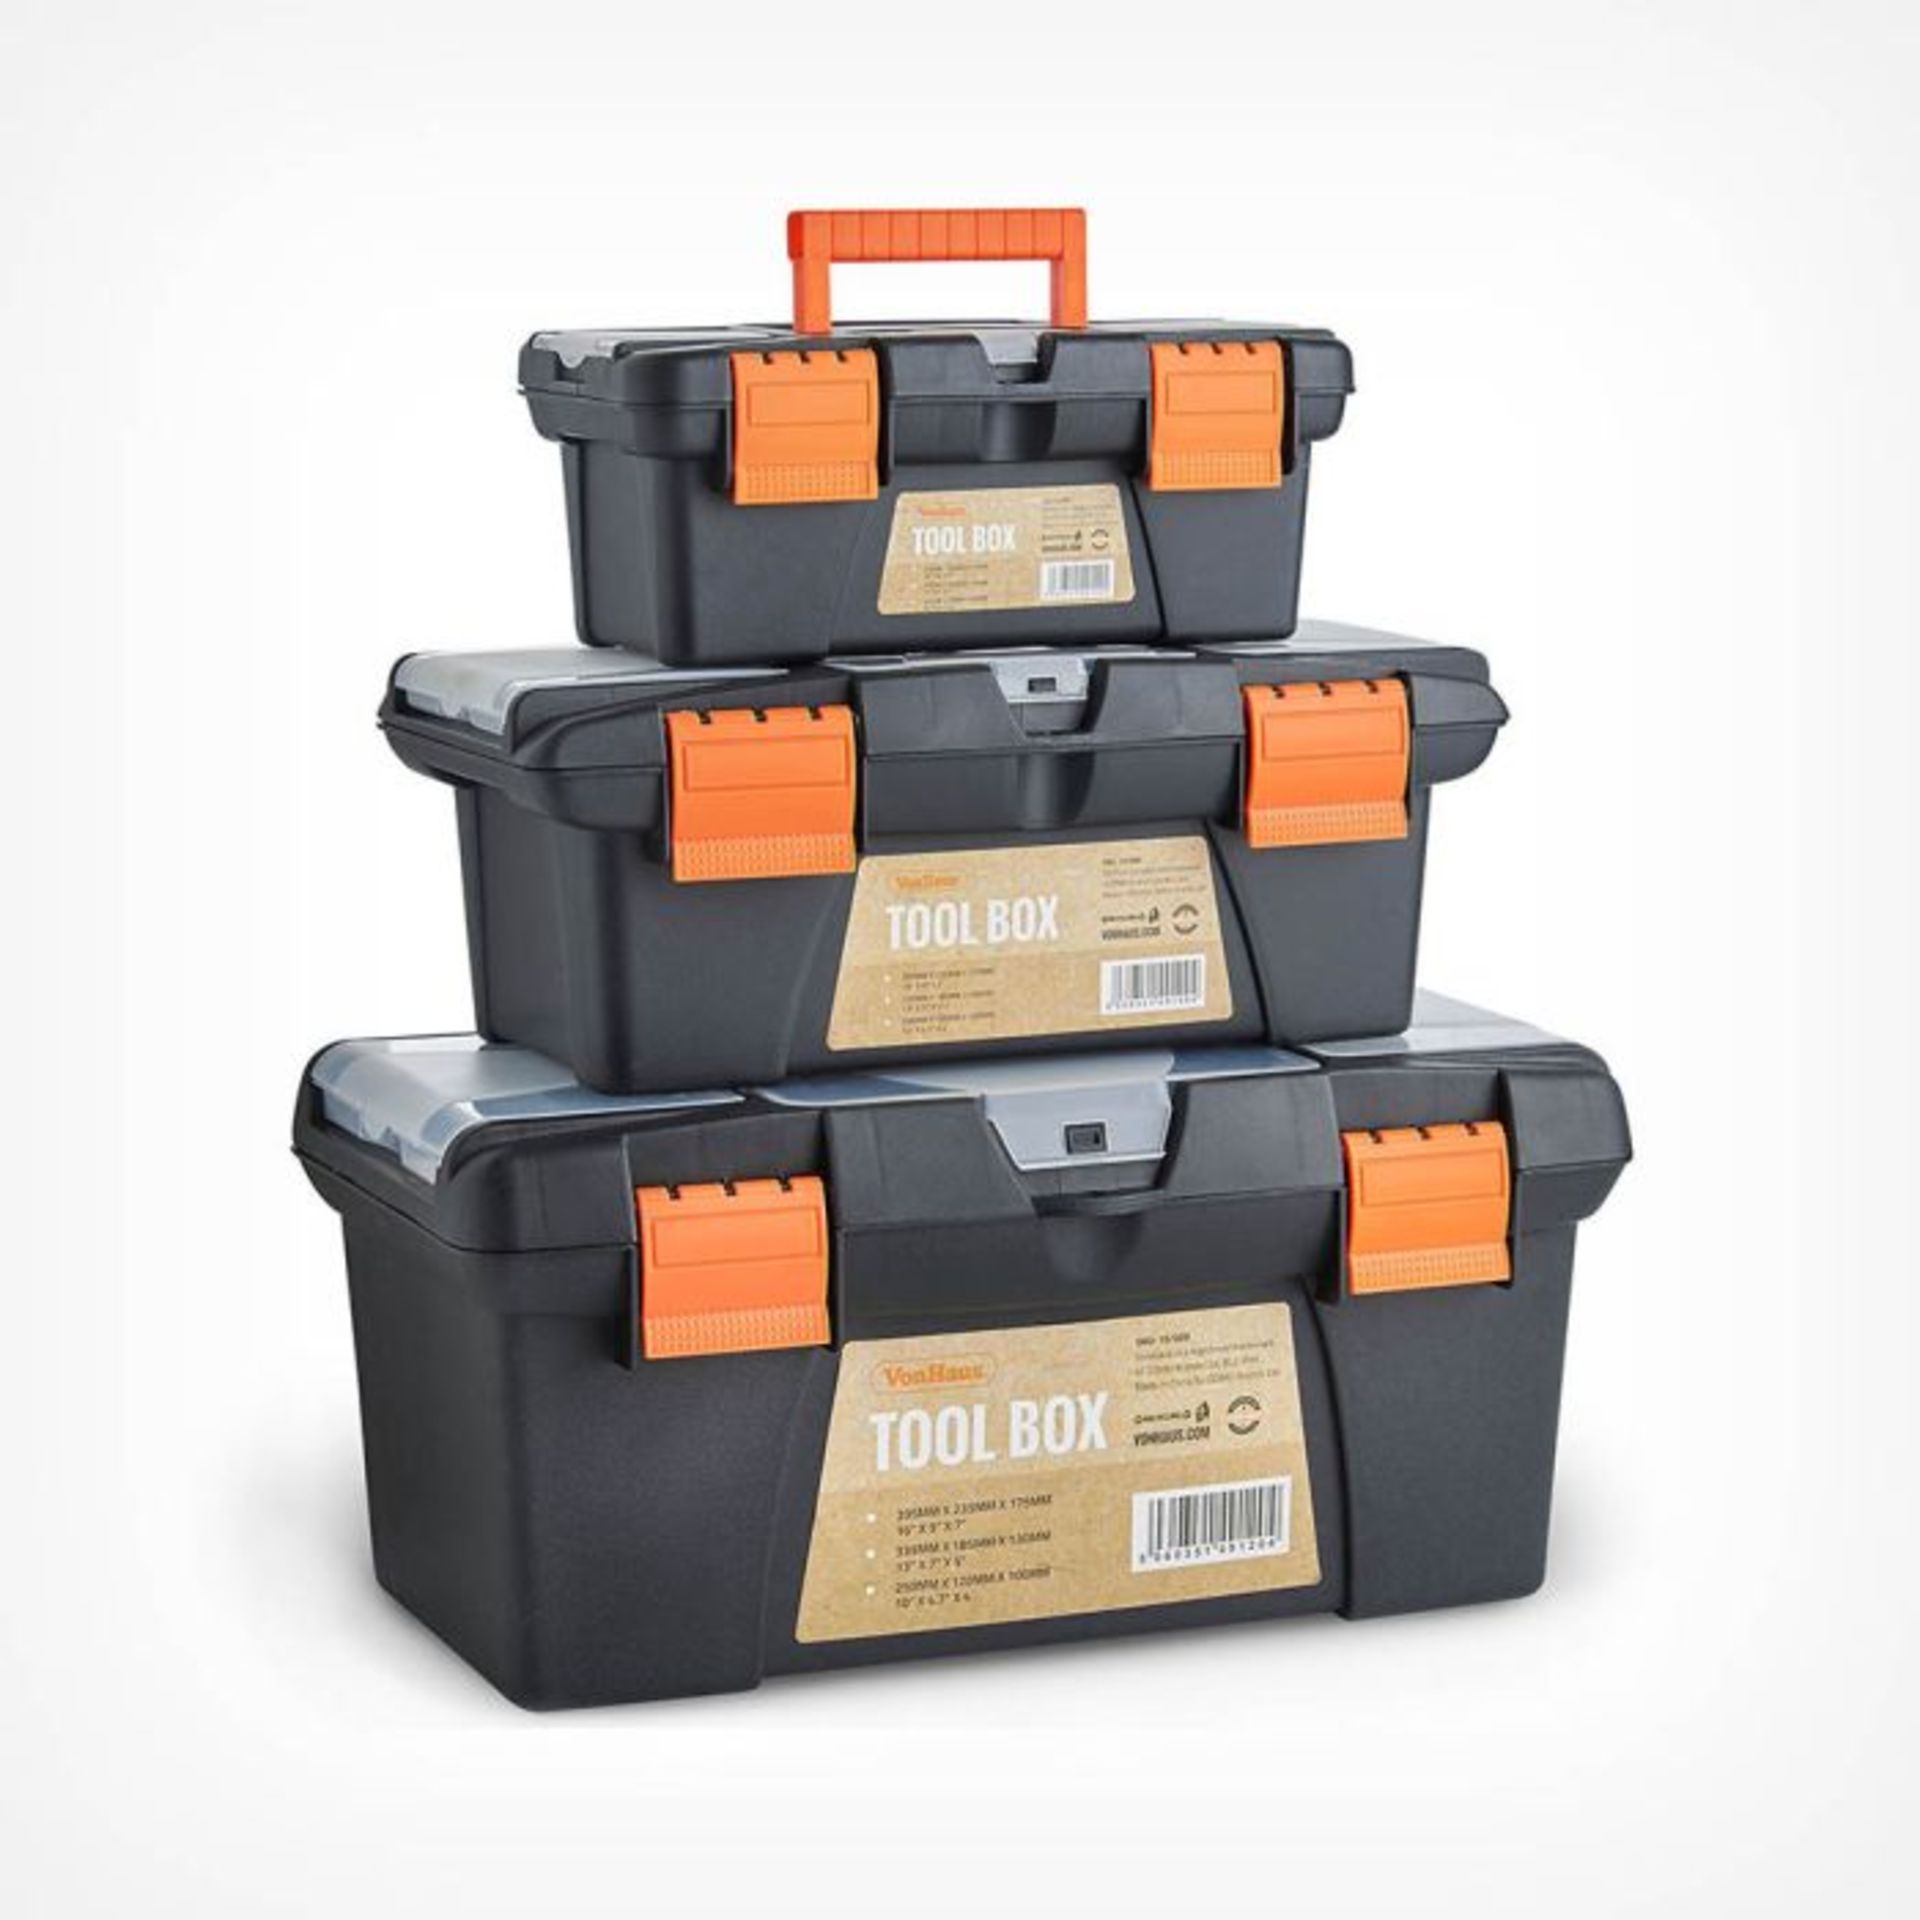 3pc Tool Box Set. Give your tools a permanent home with this handy 3-piece tool box set.